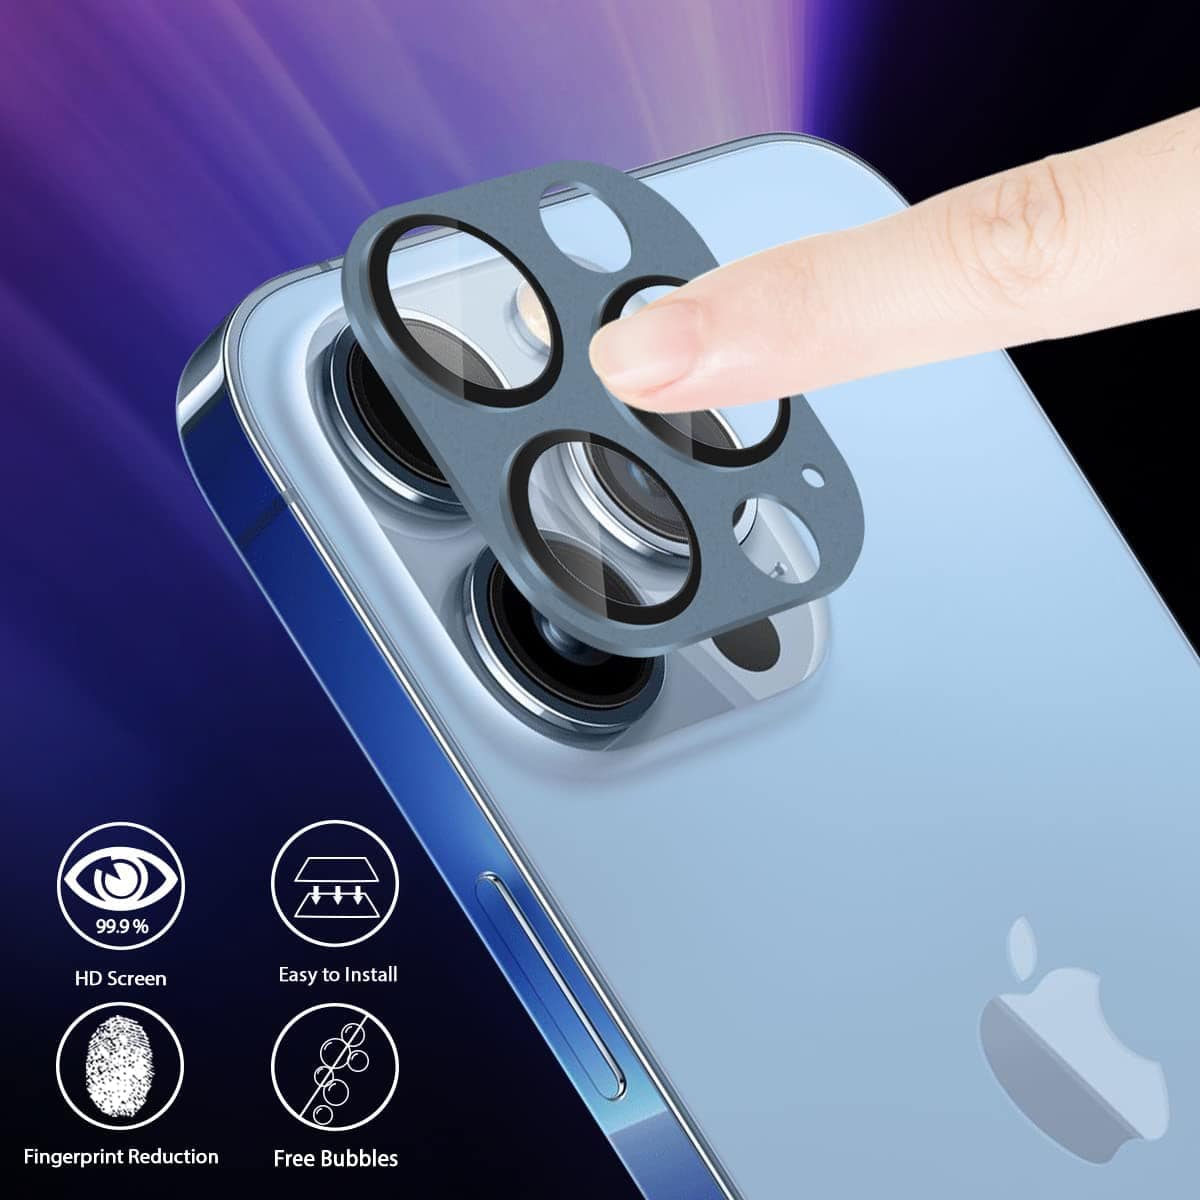 ZeroDamage Camera Lens Protector for Apple iPhone 13 Pro and iPhone 13